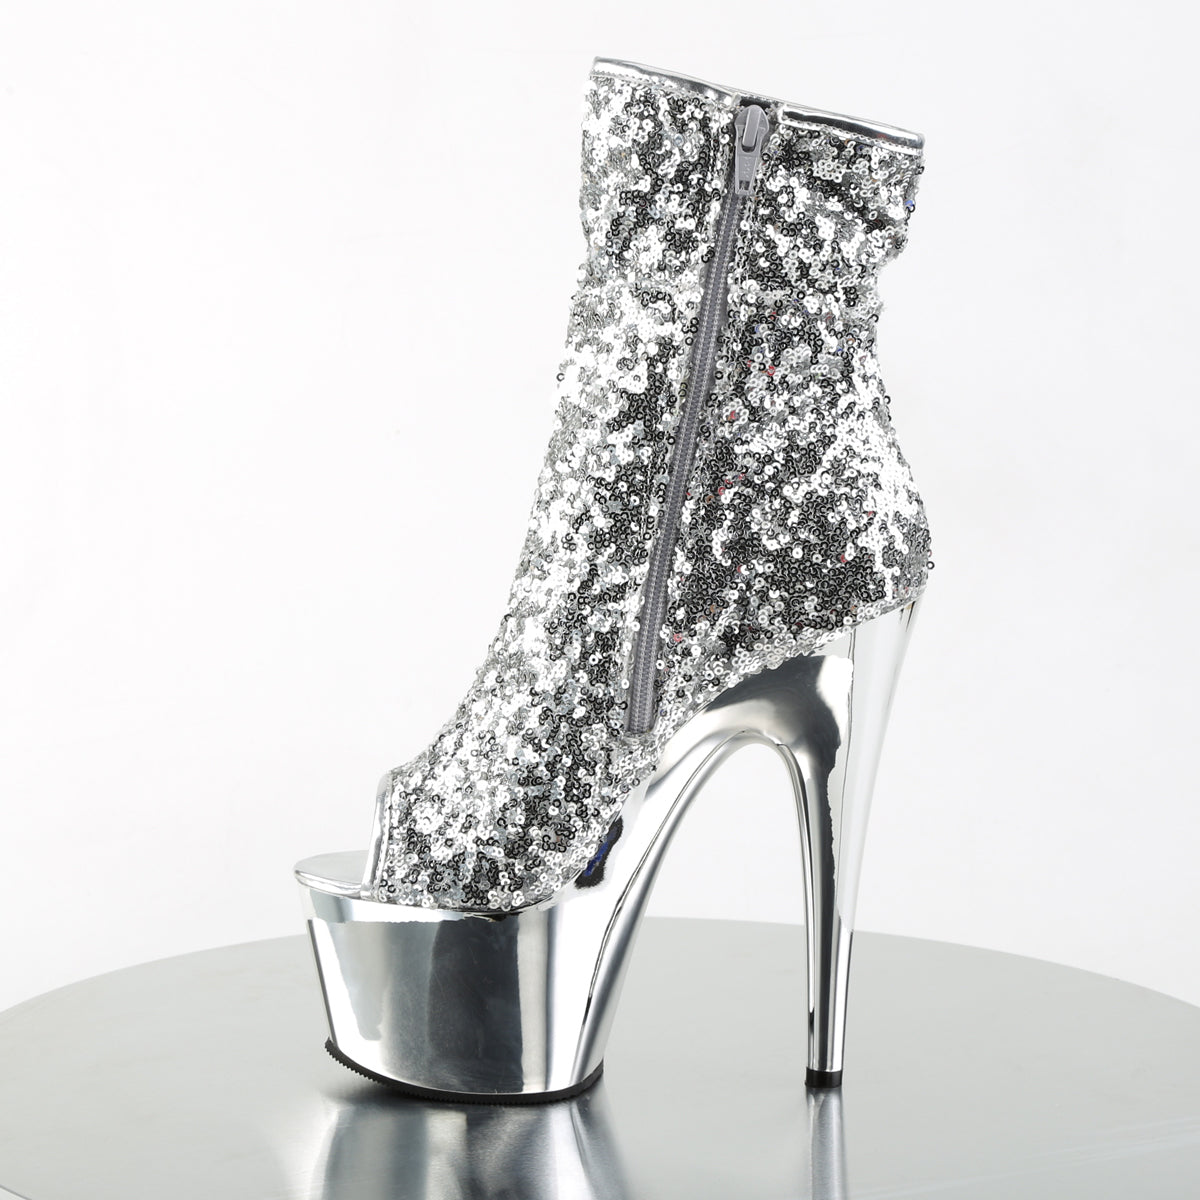 ADORE-1008SQ 7" Heel Silver Sequins Pole Dancing Ankle Boots-Pleaser- Sexy Shoes Pole Dance Heels